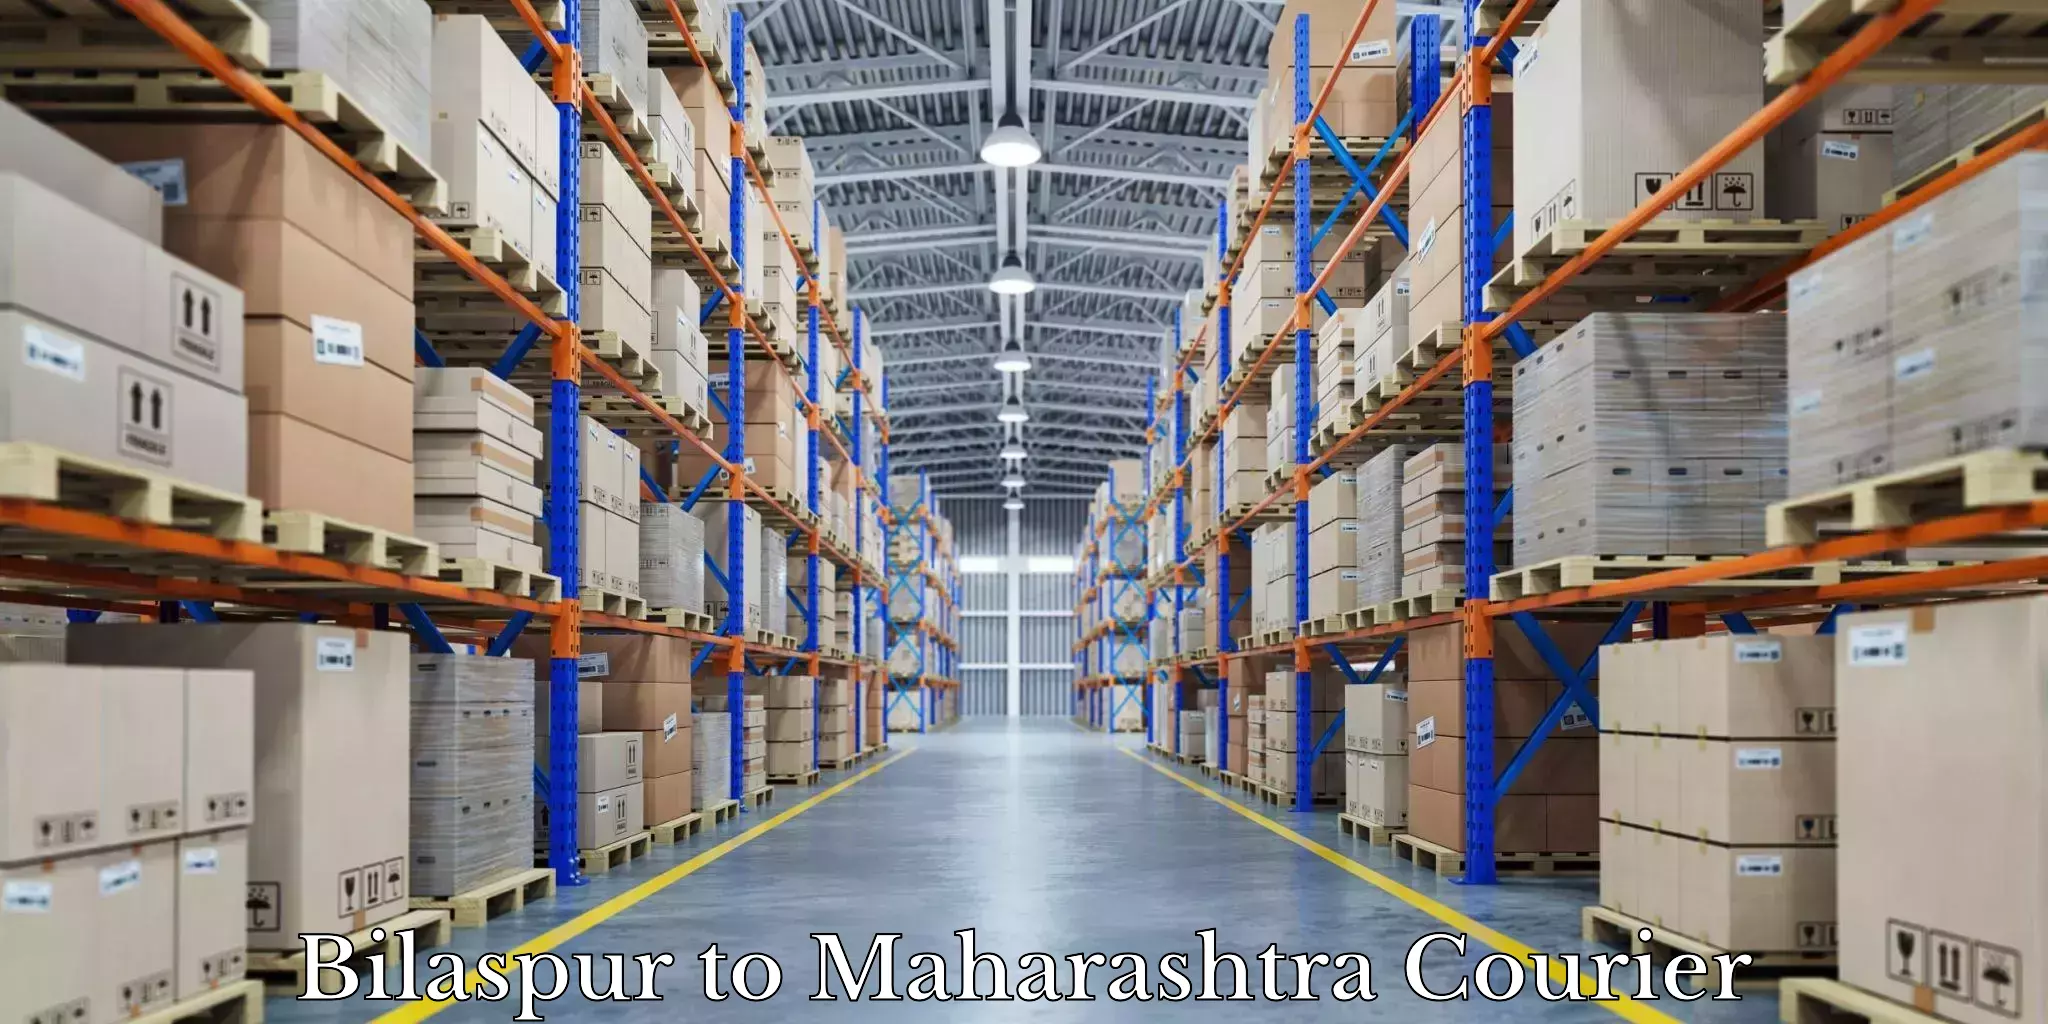 Moving and storage services Bilaspur to Junnar